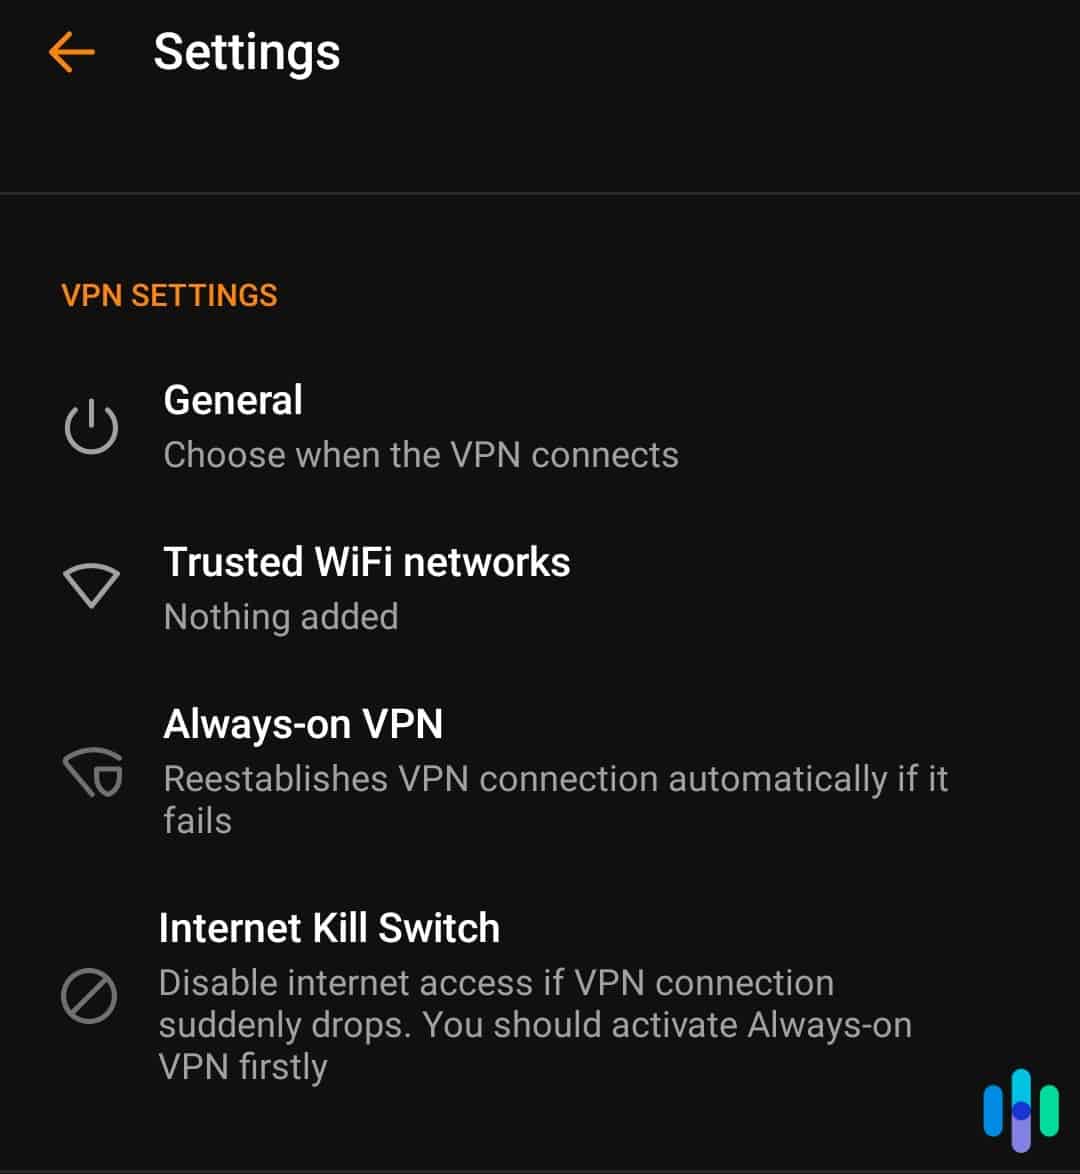 A VPN kill switch disables your internet access when the VPN connection drops.